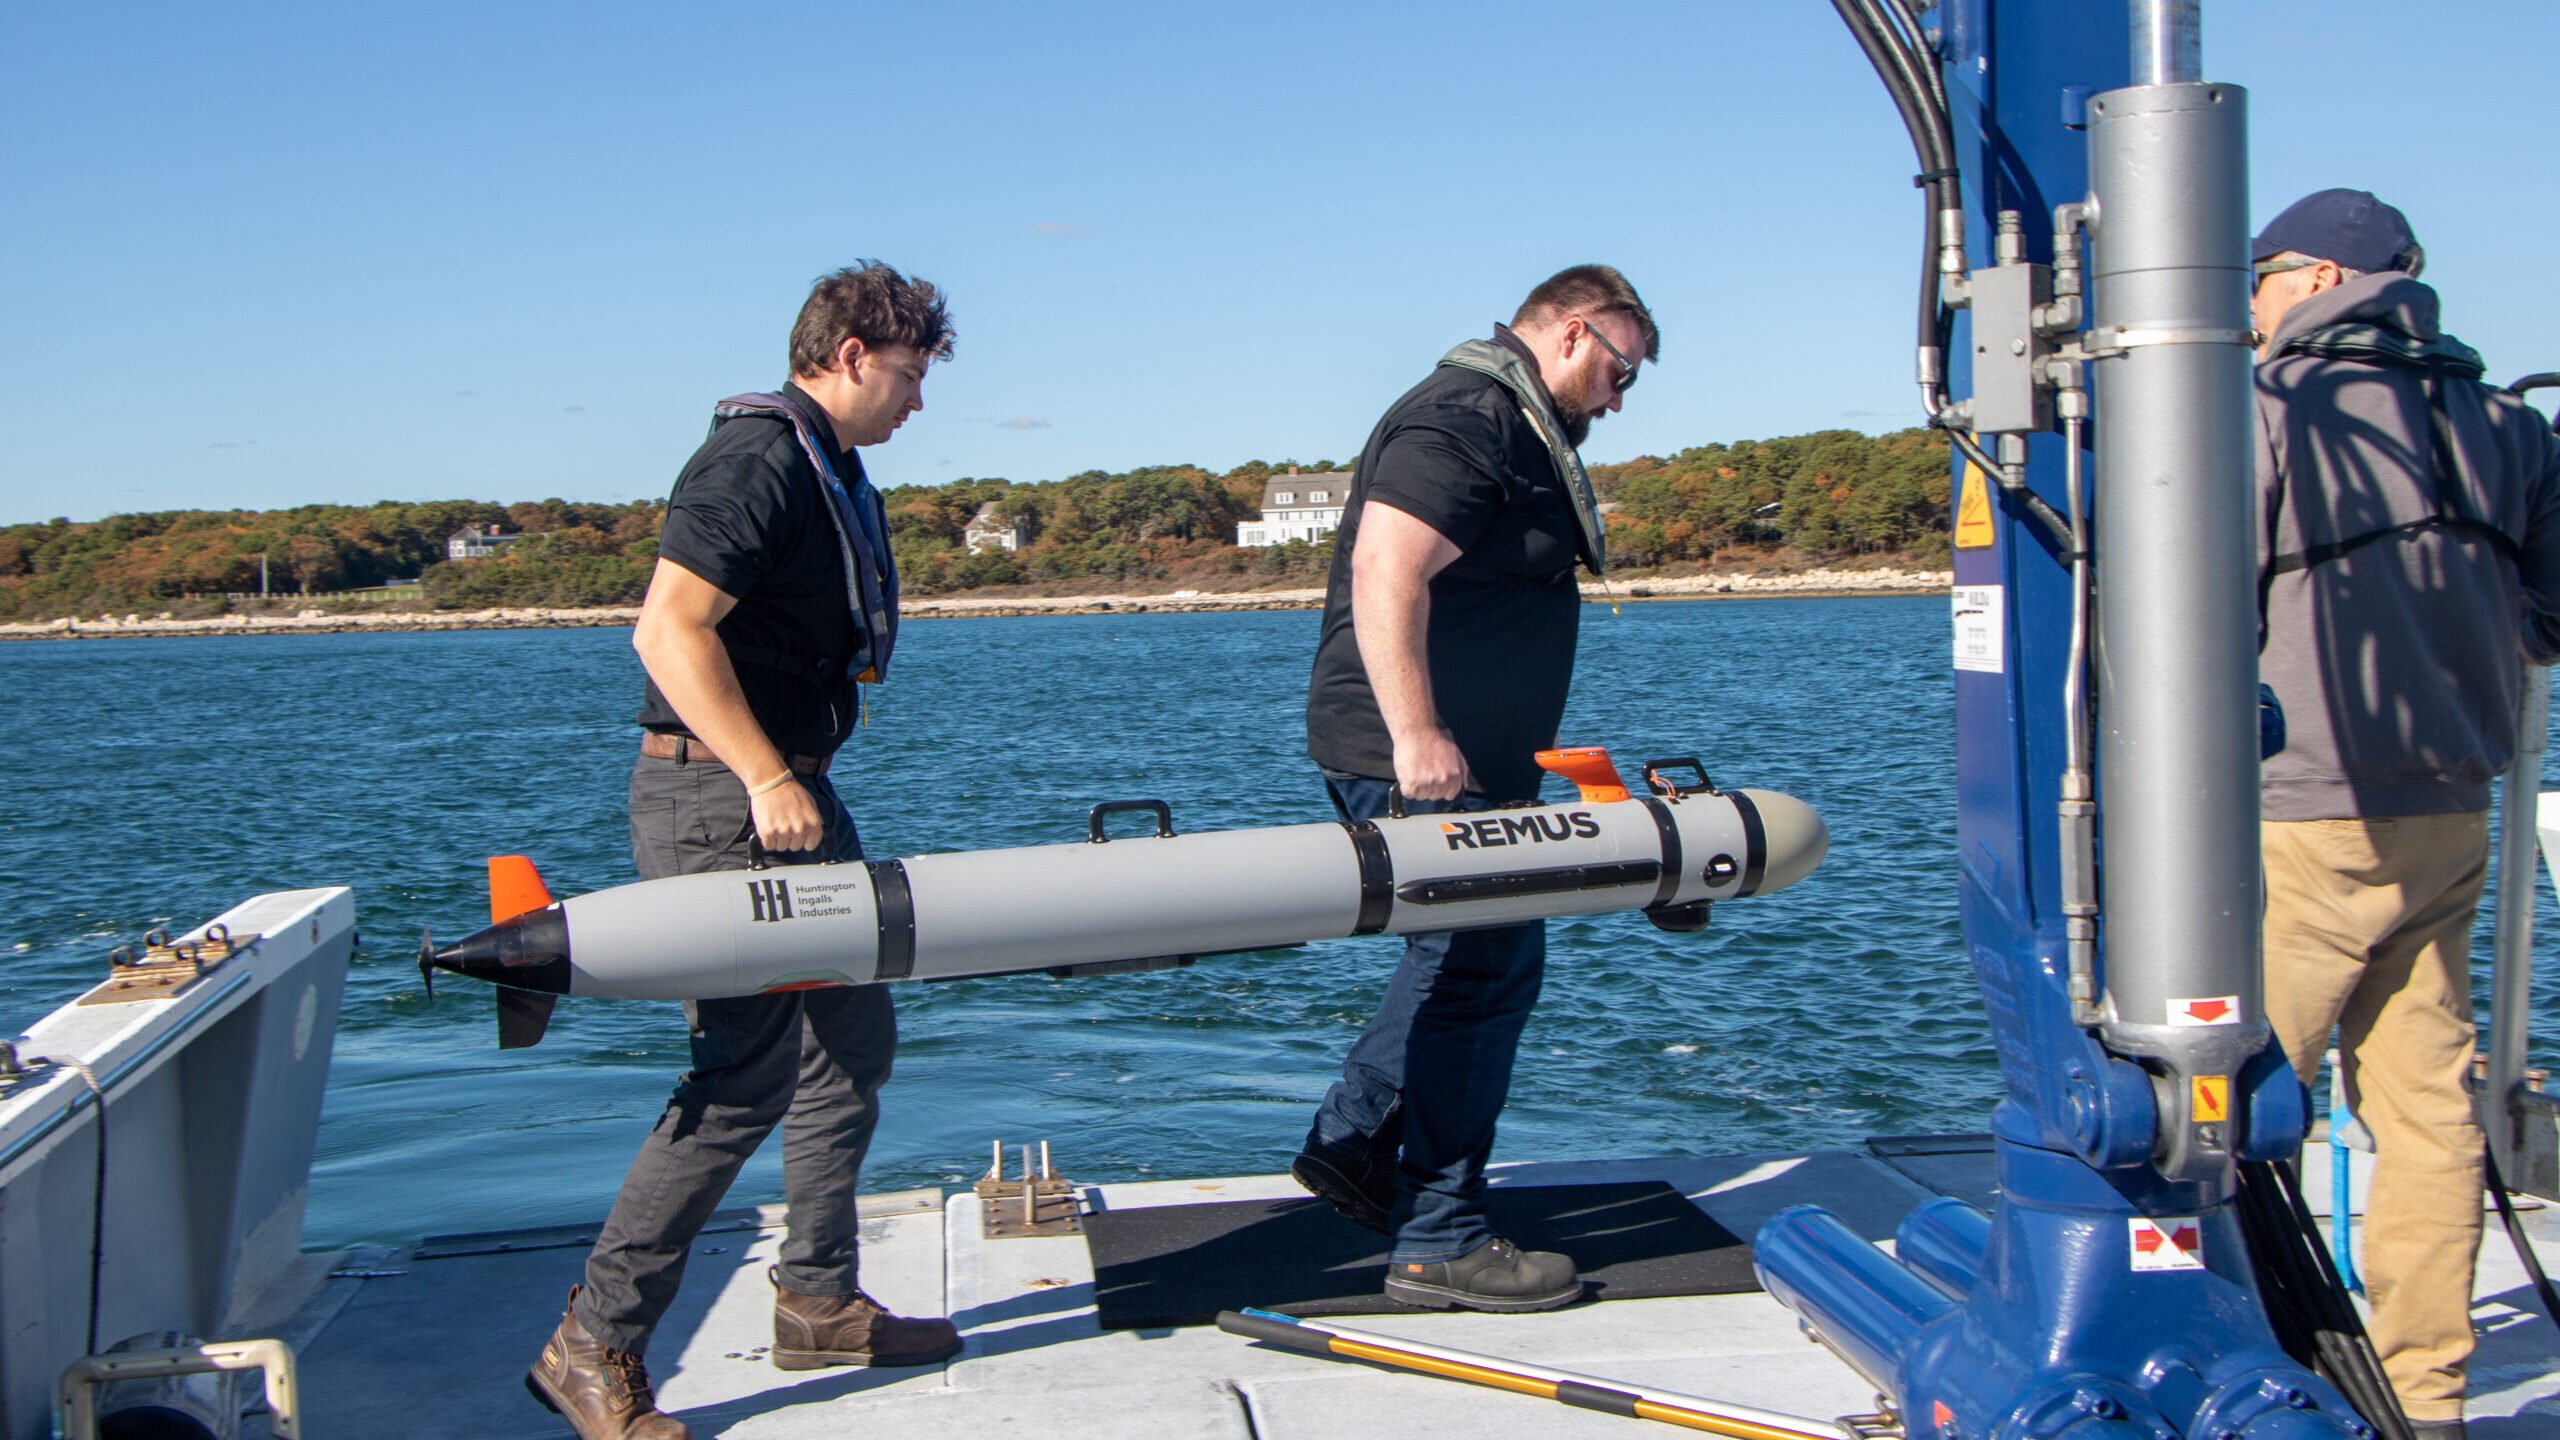 HII, Ocean Aero agreement takes at linking unmanned vessels - Breaking Defense